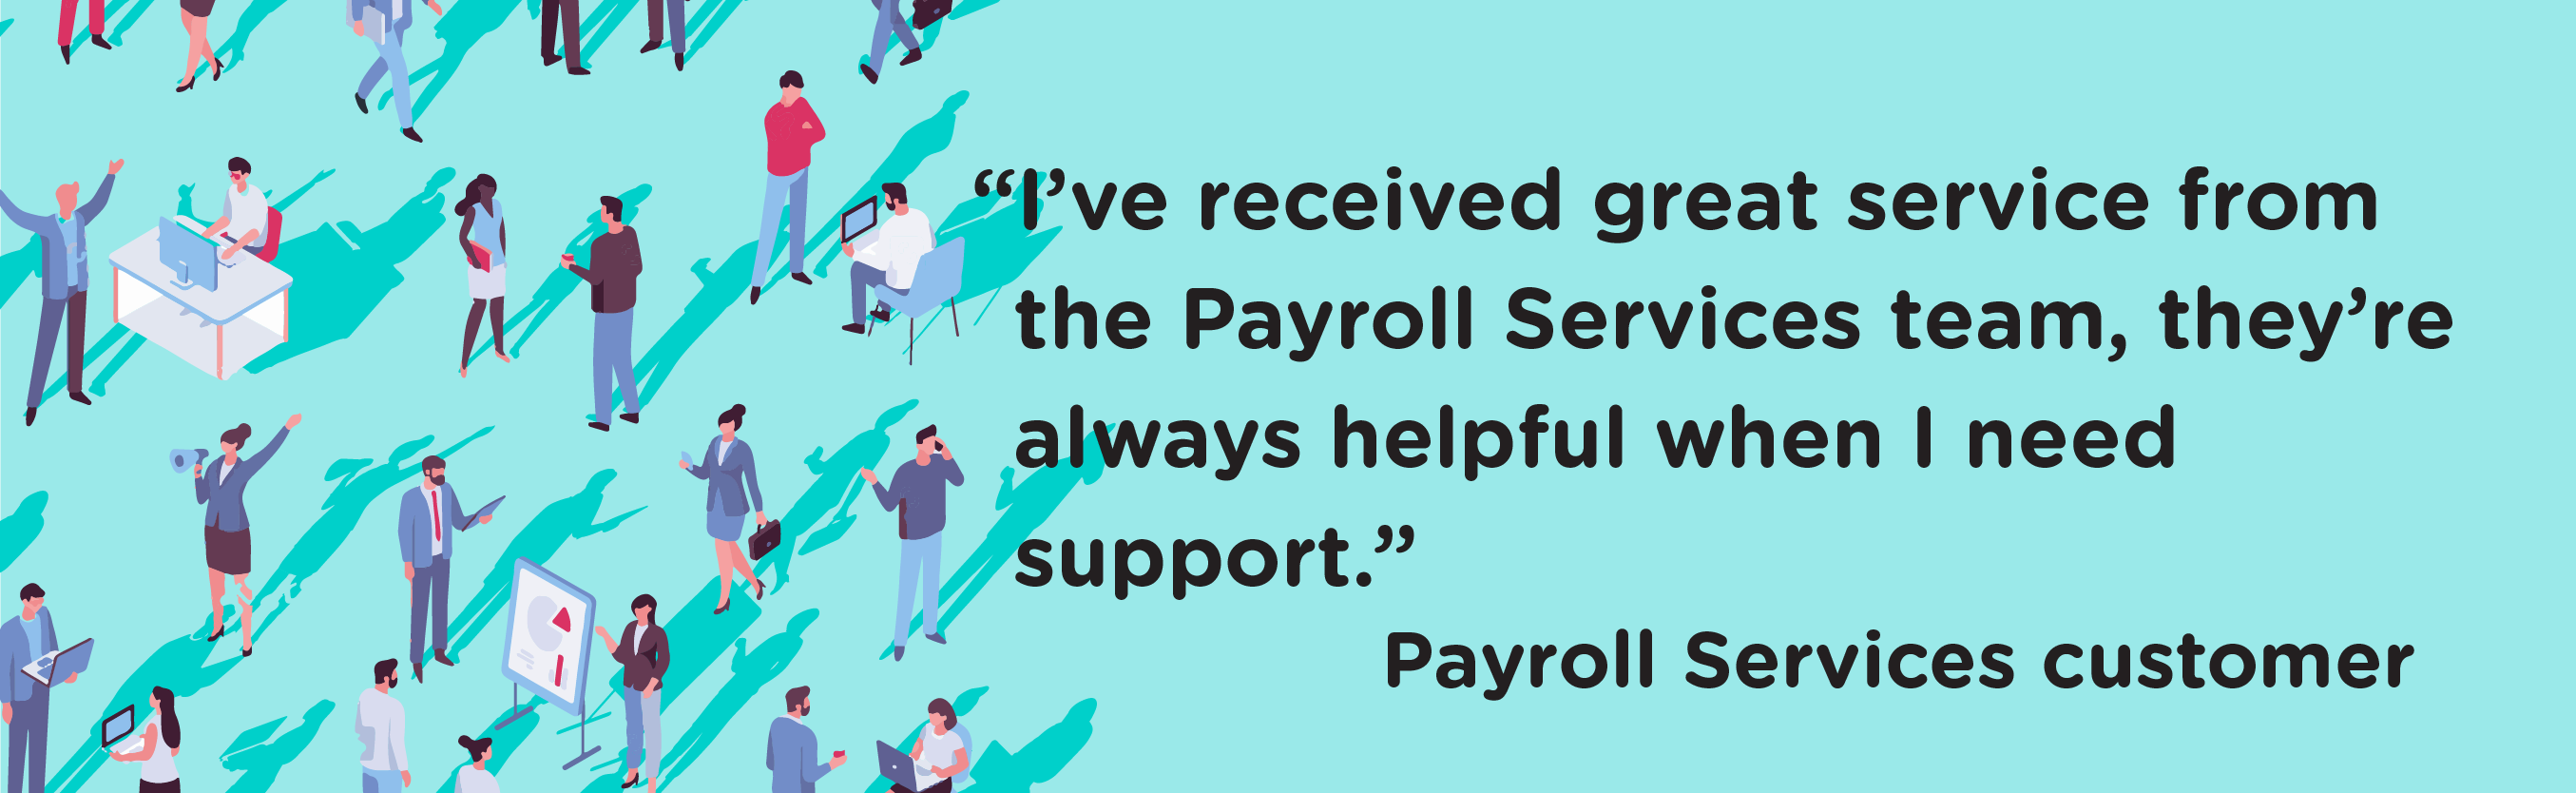 Payroll Services customer quote reading "I've received great service from the Payroll Services team, they're always helpful when I need support."